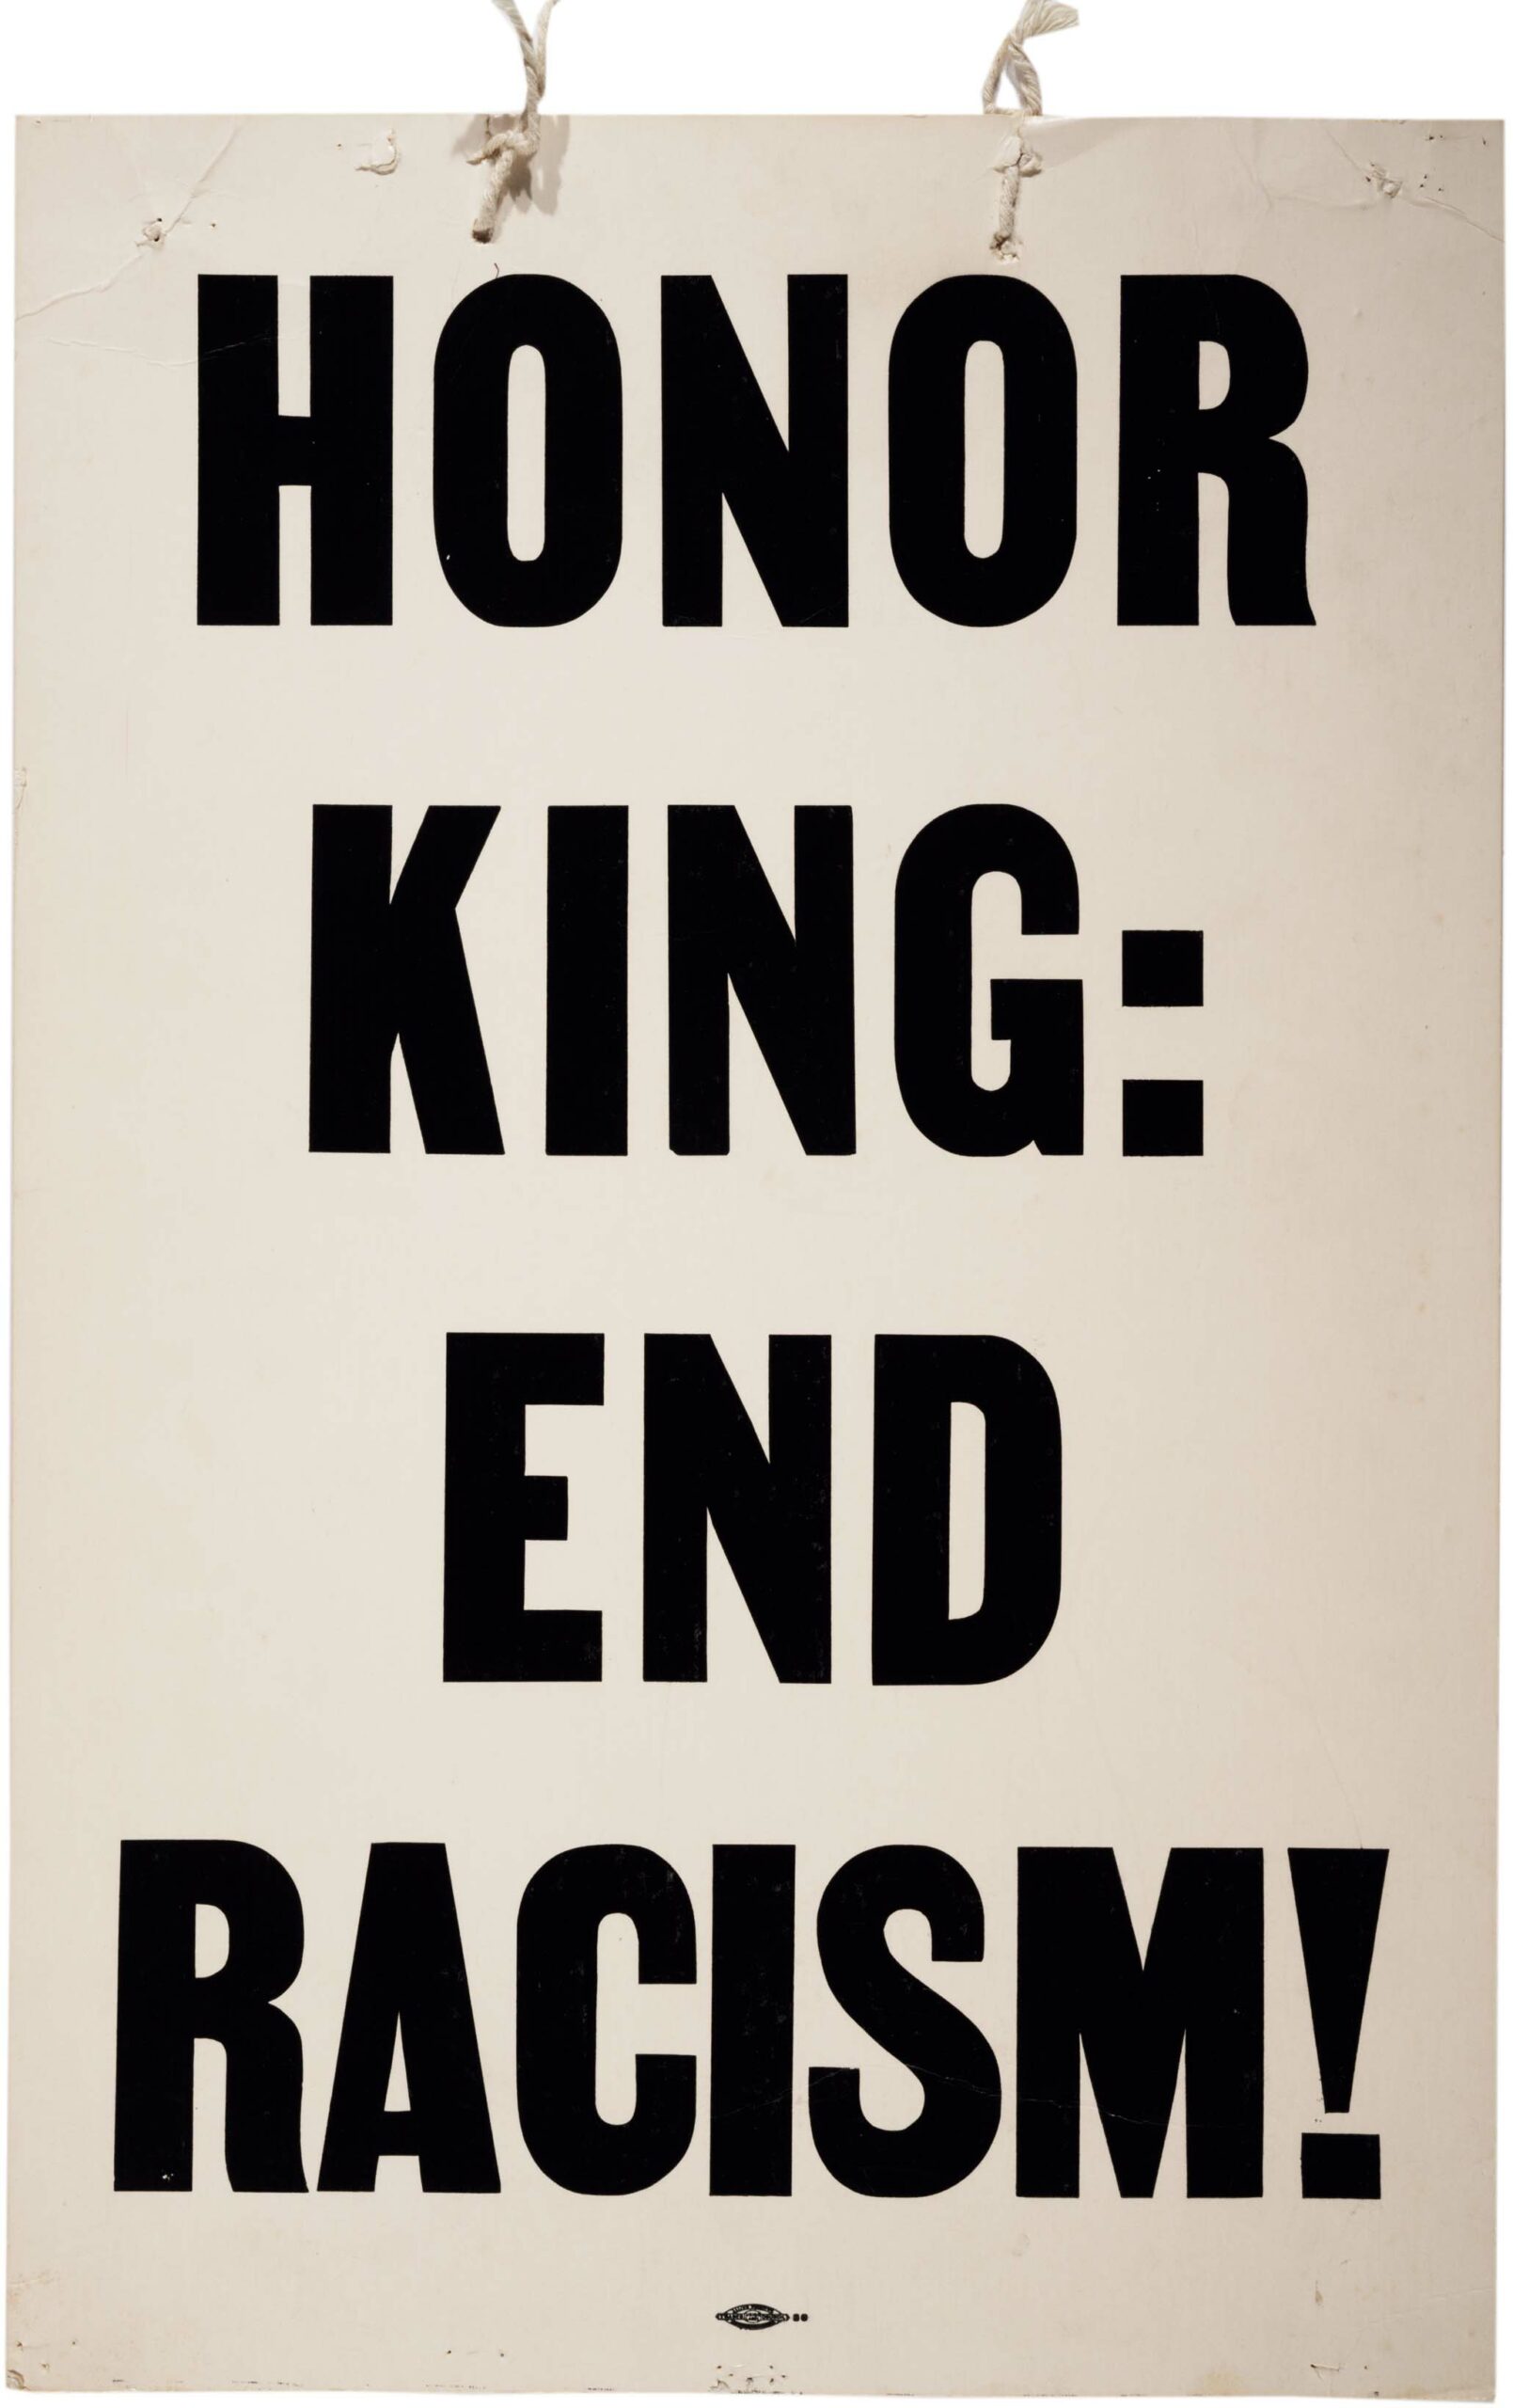 GLC 6125 p.1.  Allied Printing.  Broadside: Poster designed for a march the day after Martin Luther King Jr.'s assassination, 5 April 1968.  (The Gilder Lehrman Collection, courtesy of the Gilder Lehrman Institute of American History. Not to be reproduced without written permission.)